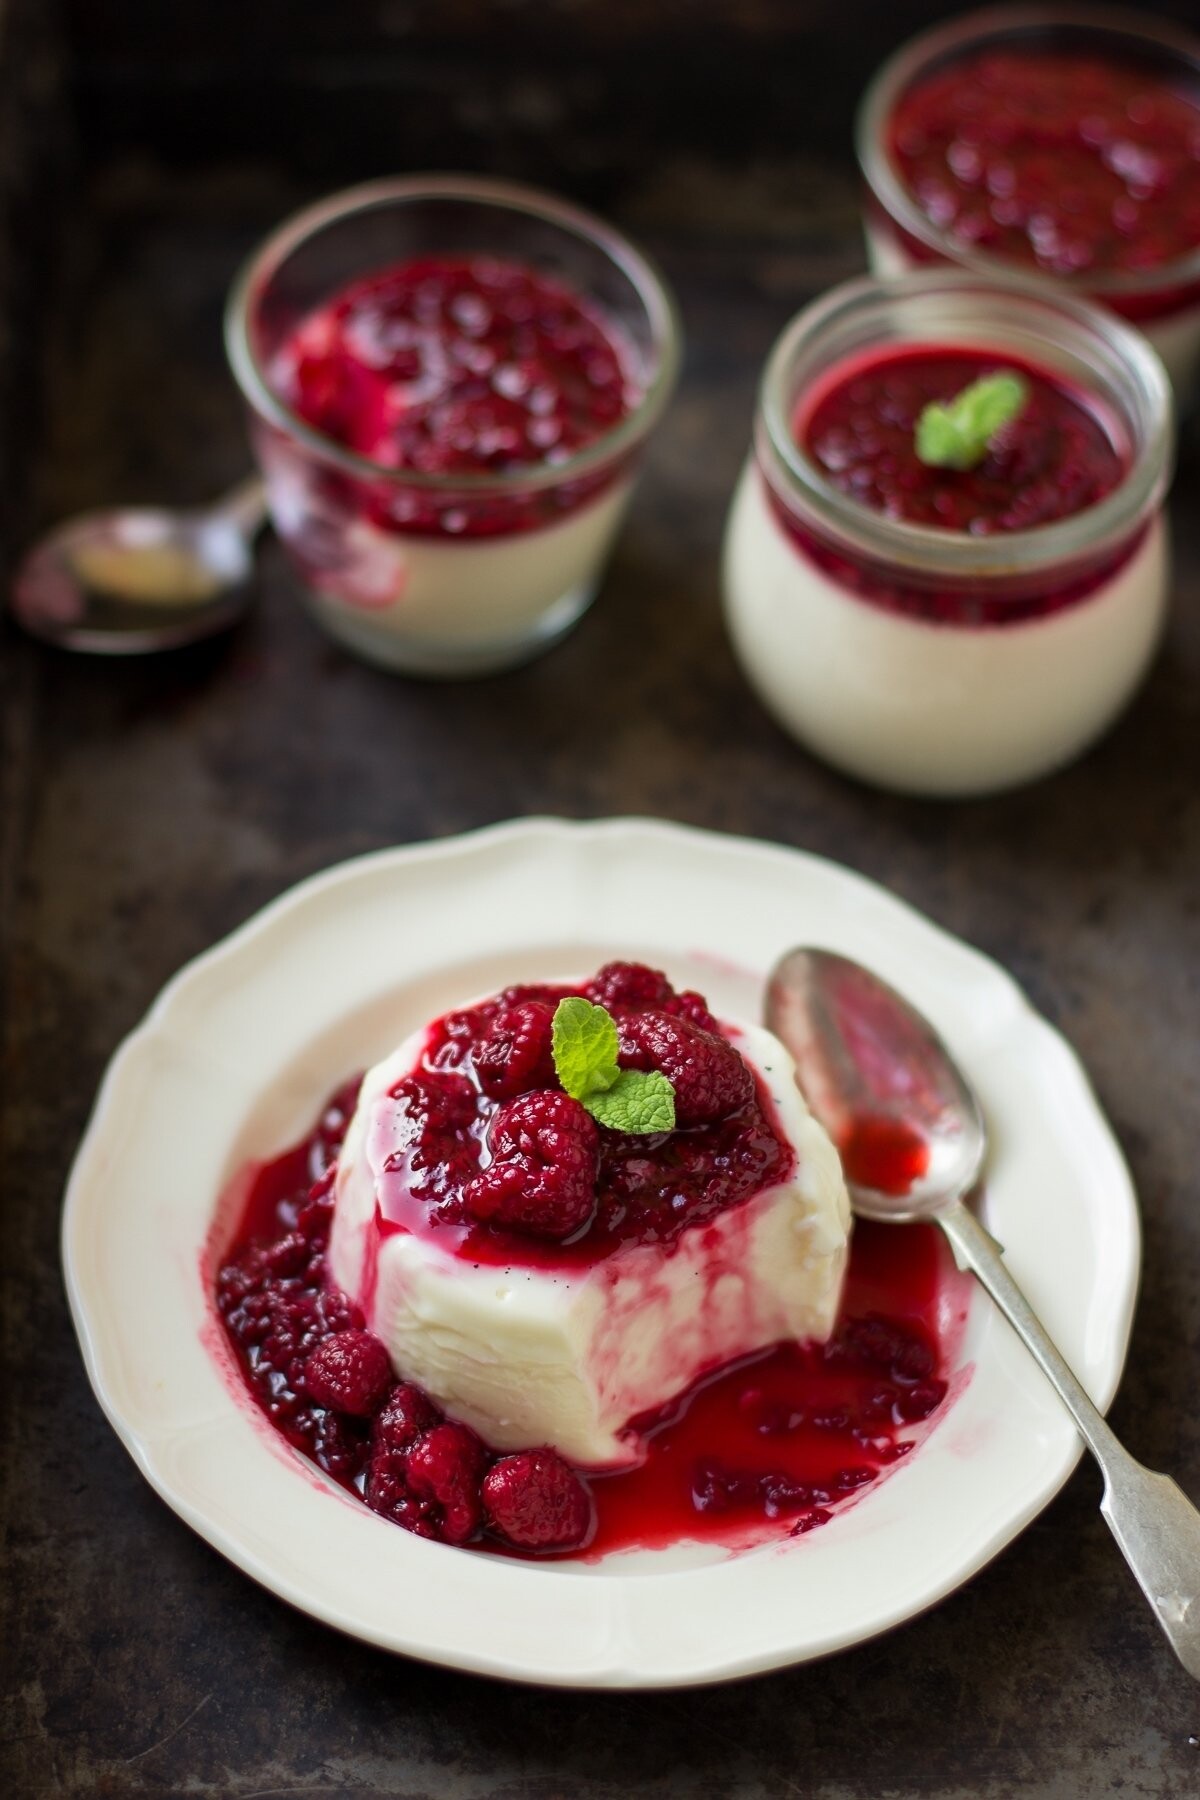 This is a photo of the first panna cotta I have made. It tasted like heaven! I like to serve panna cotta with slightly sour raspberry sauce.